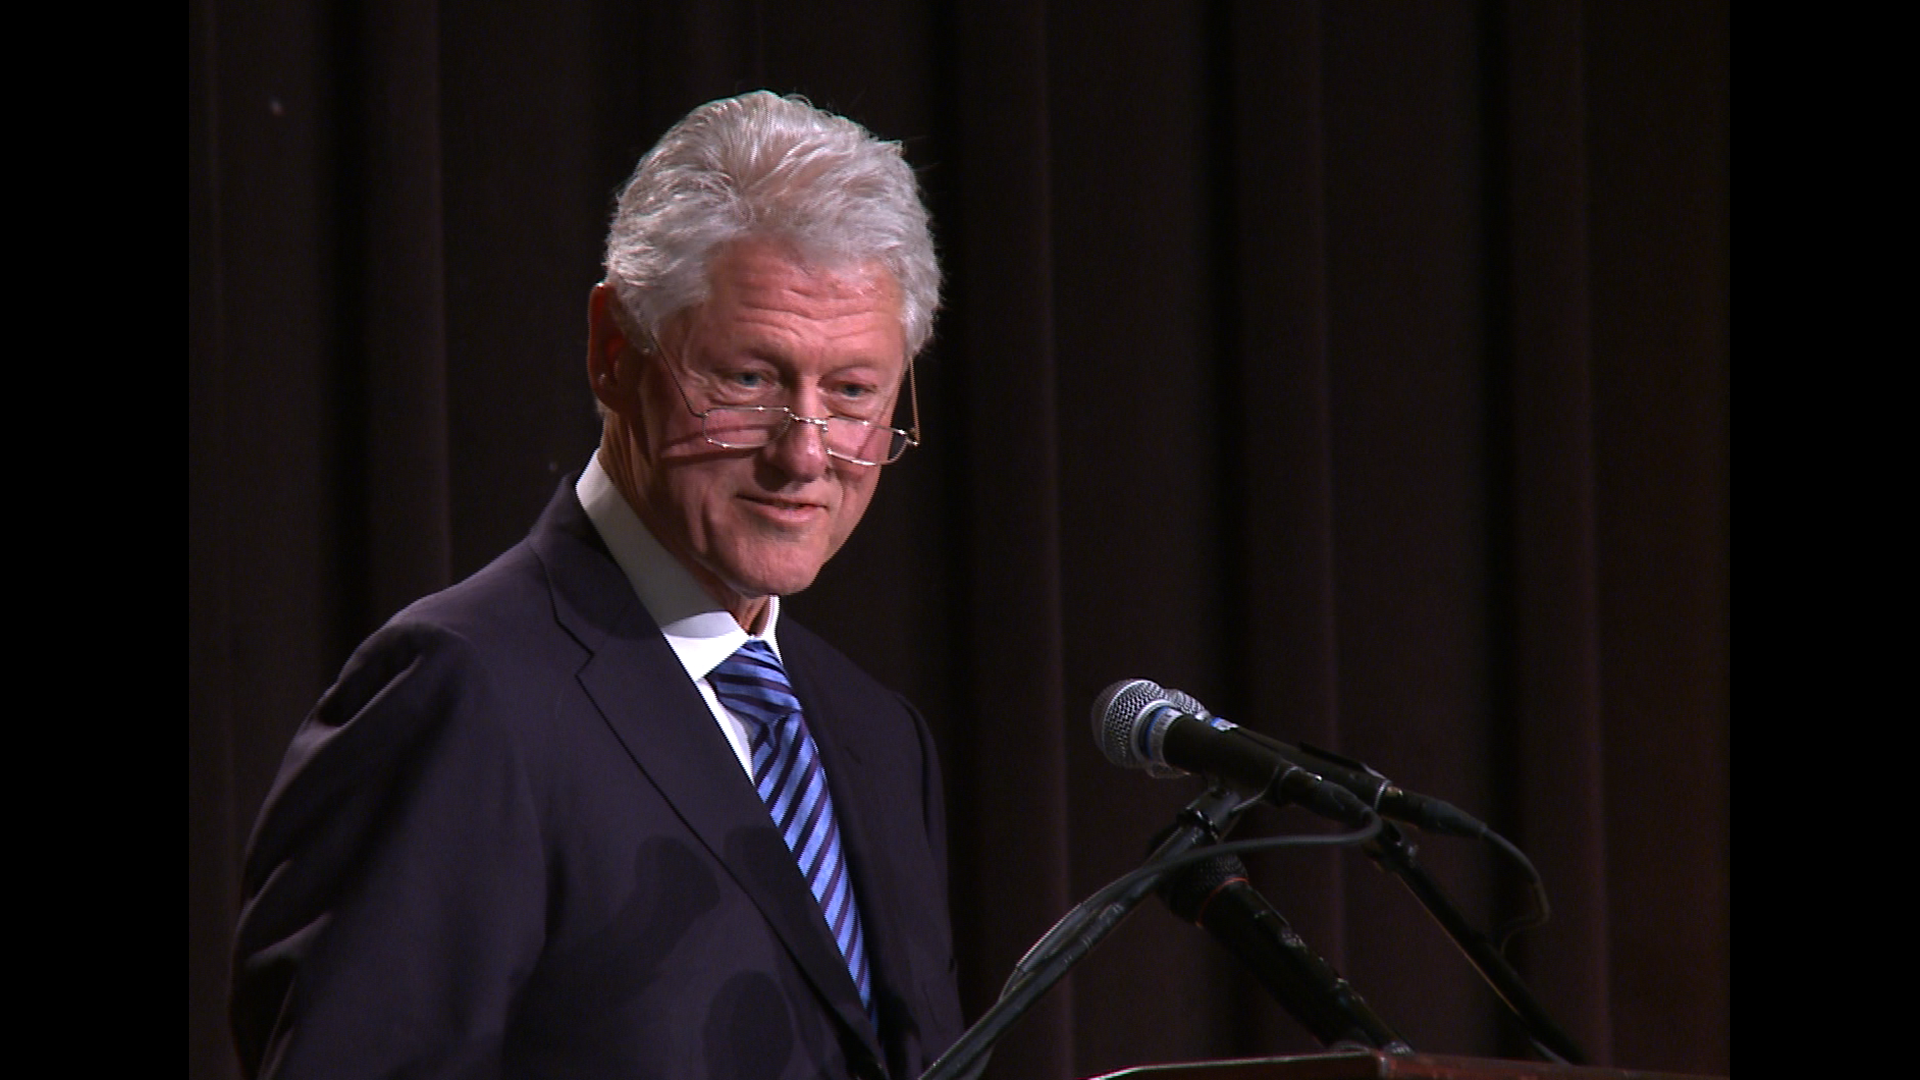 Former President Bill Clinton announced this afternoon that he tested positive for COVID-19.